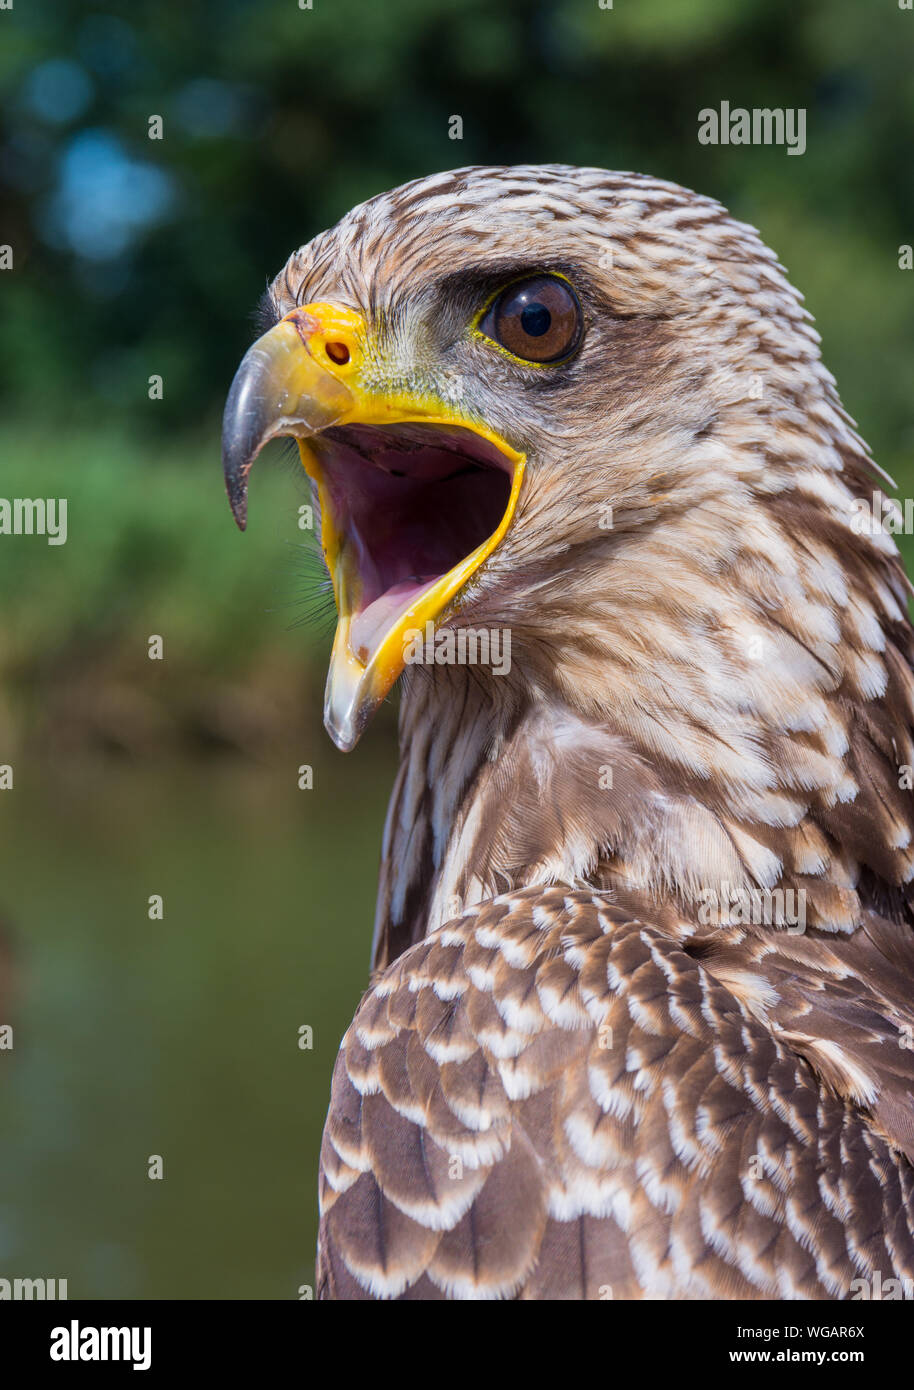 Close-up Of Yellow-billed Kite Squawking Outdoors Stock Photo